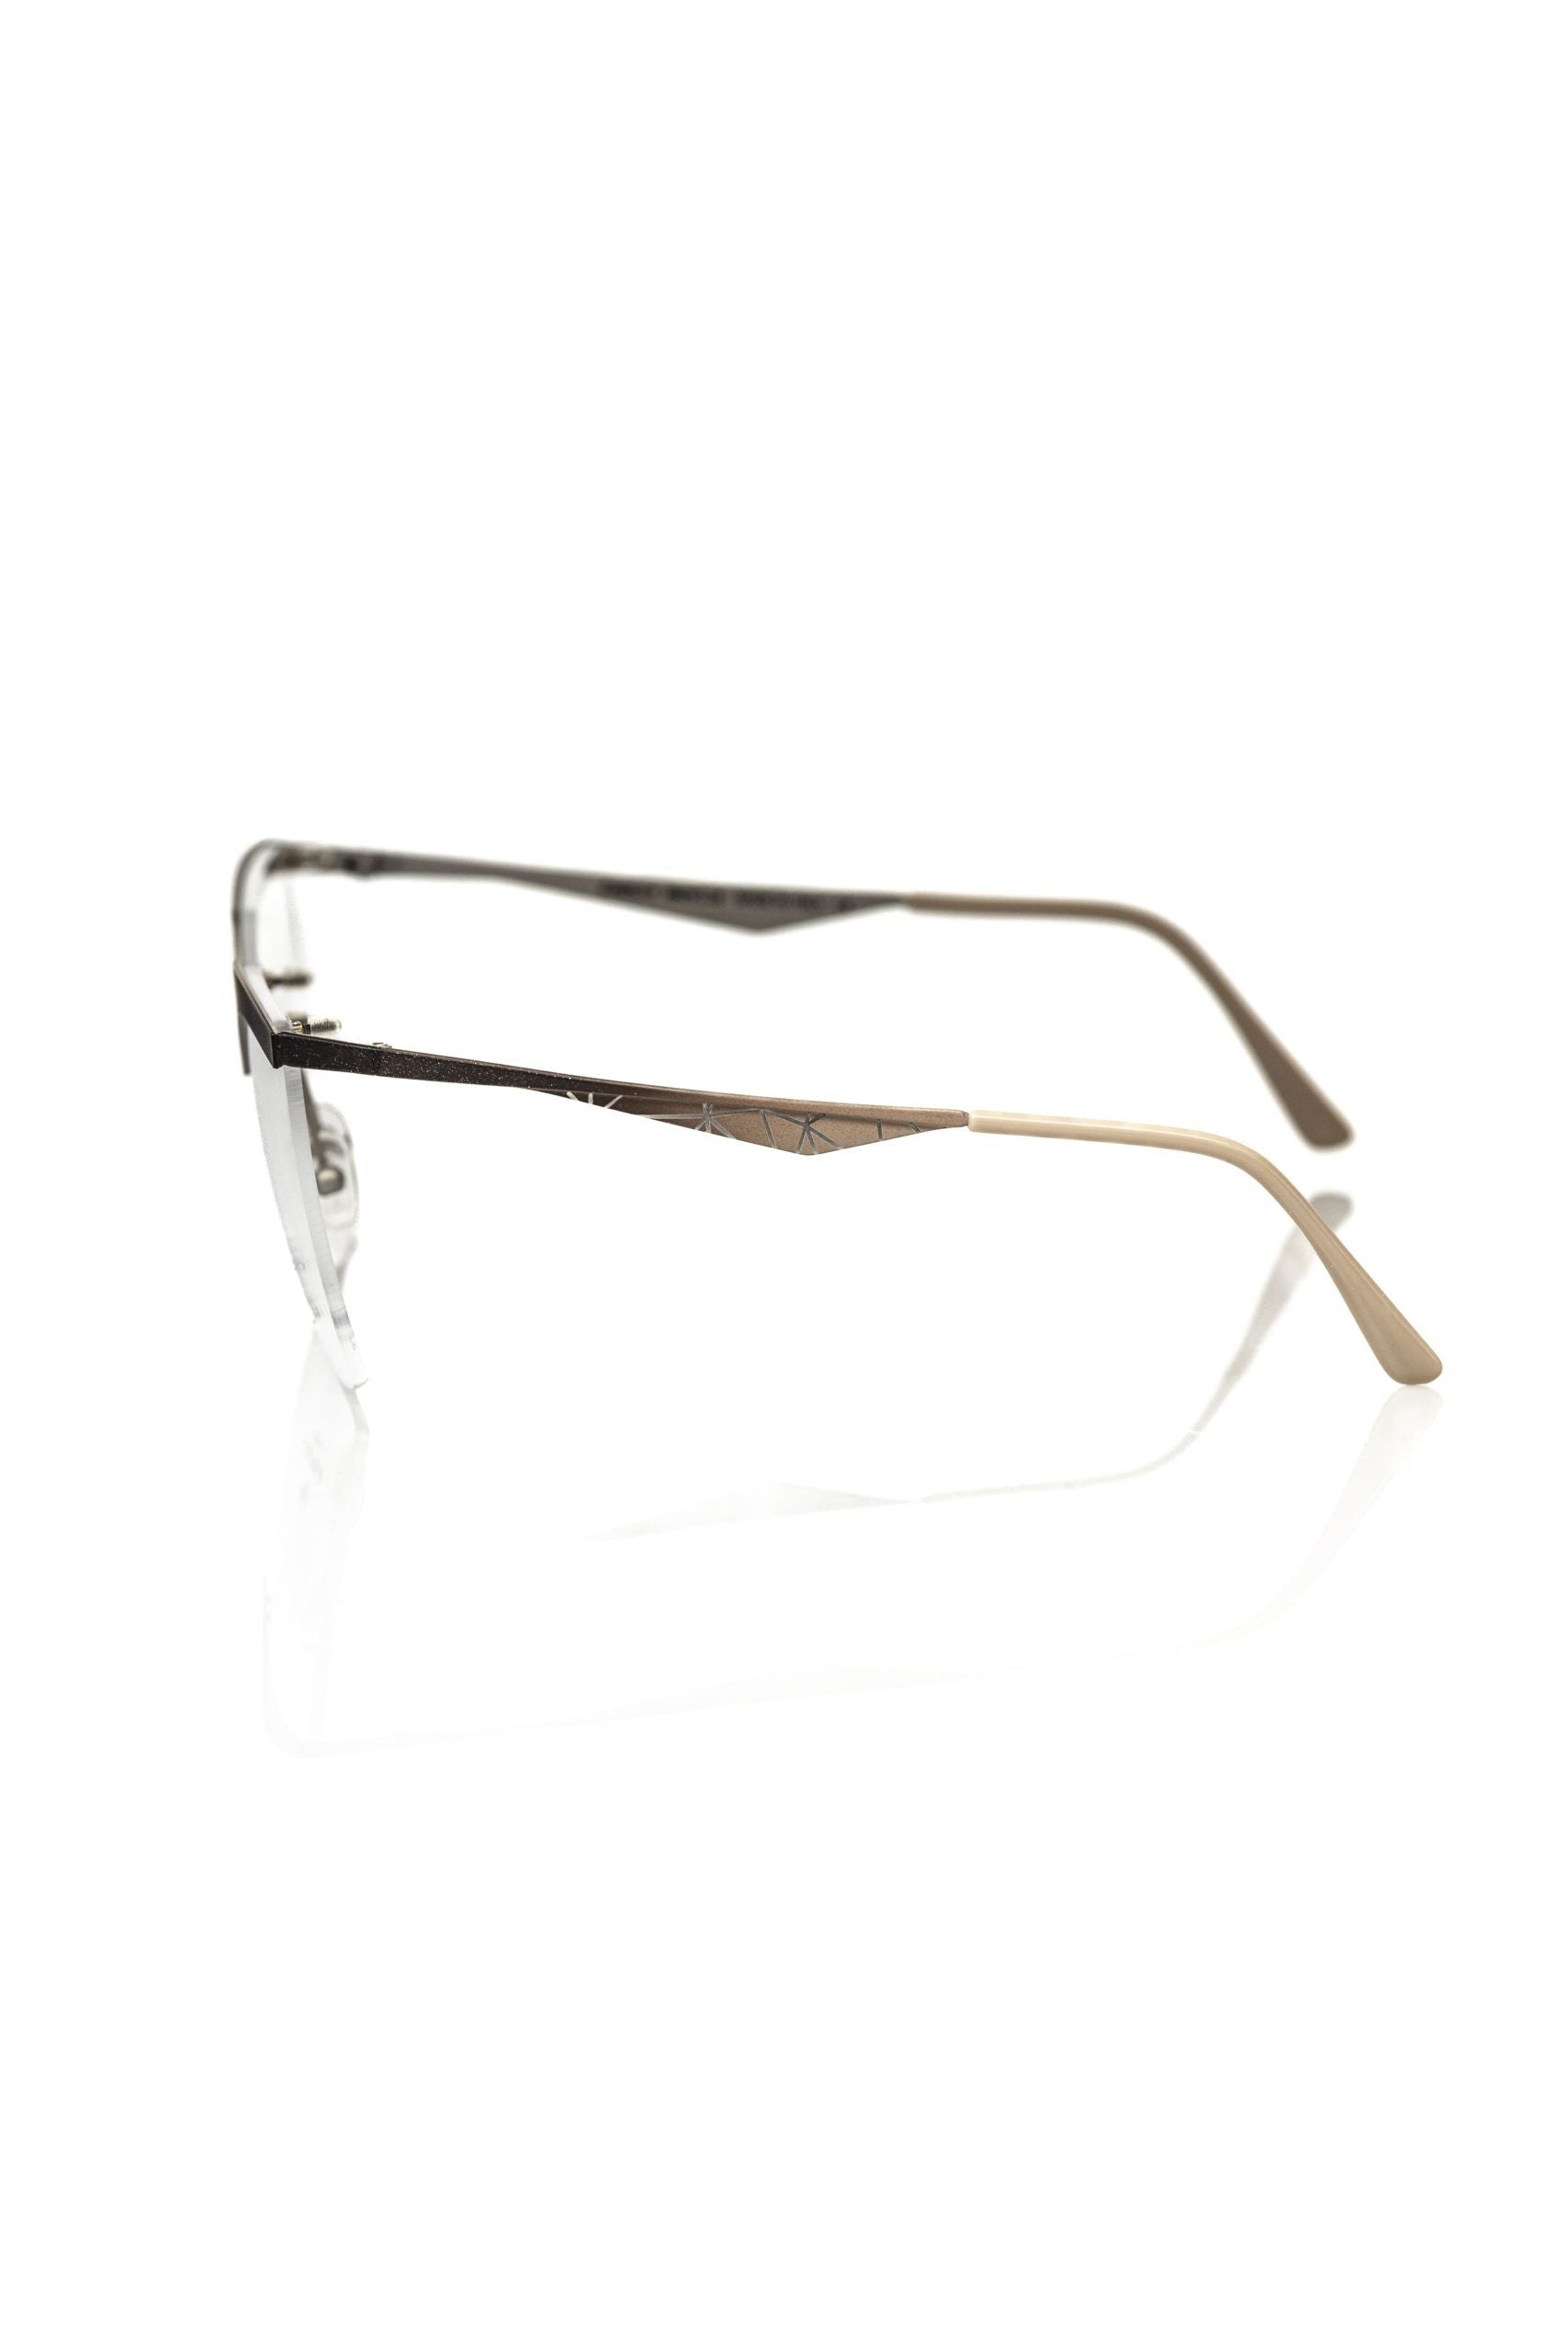 Frankie Morello FRMO-22114 Gold Metallic Fibre Frames - Designed by Frankie Morello Available to Buy at a Discounted Price on Moon Behind The Hill Online Designer Discount Store